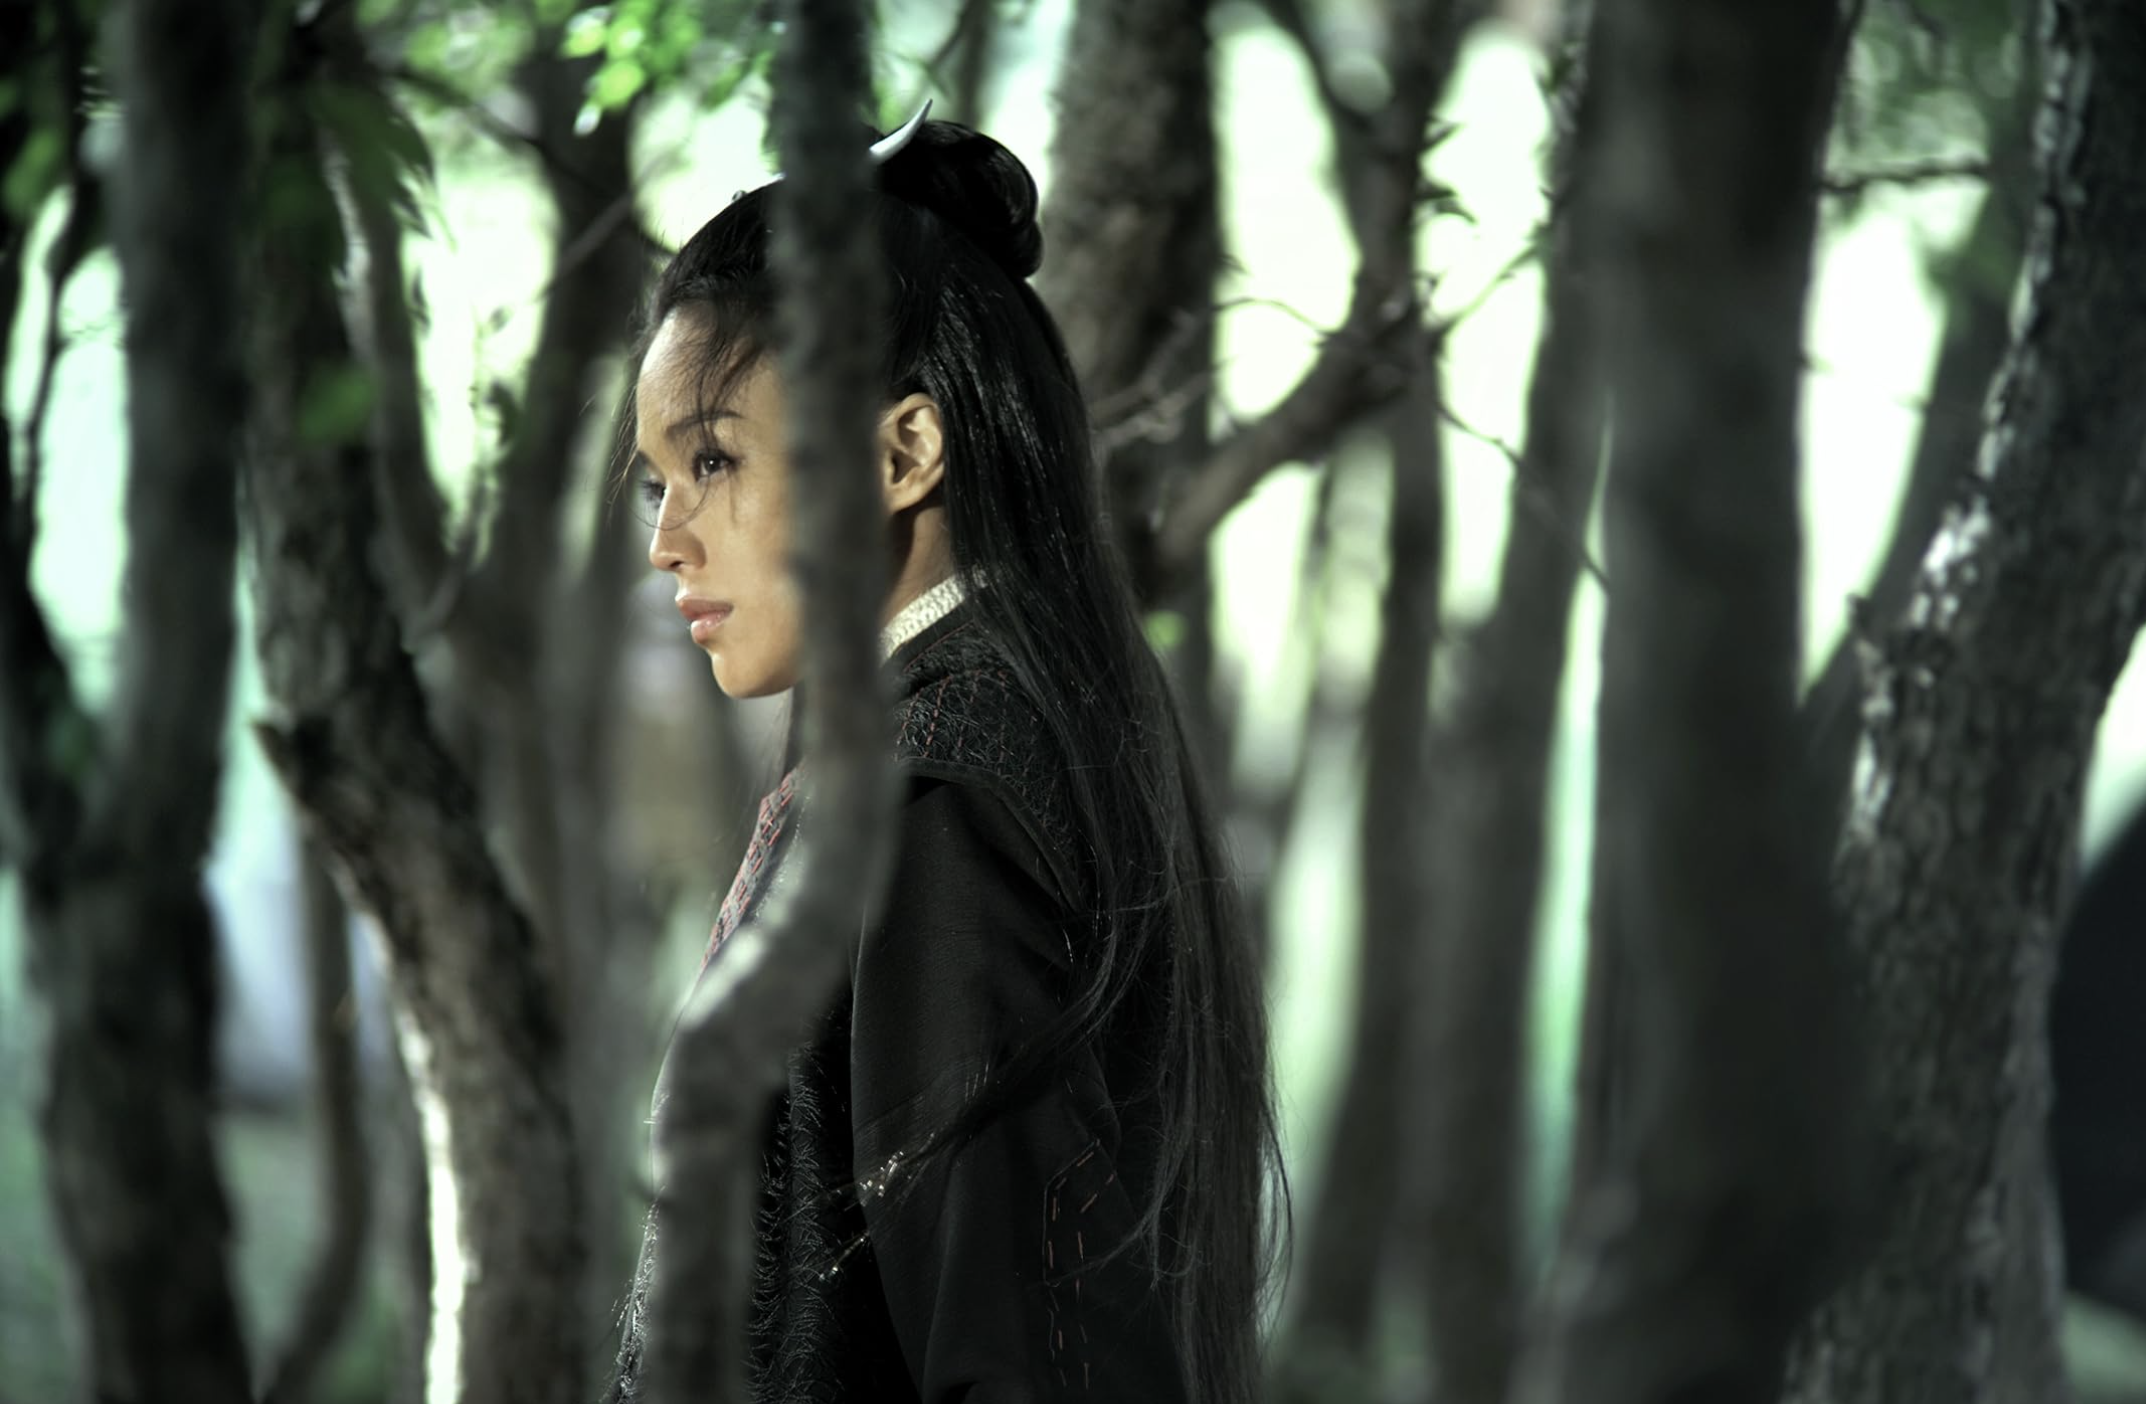 Still image from the film Assassin with the main character standing in a forest.